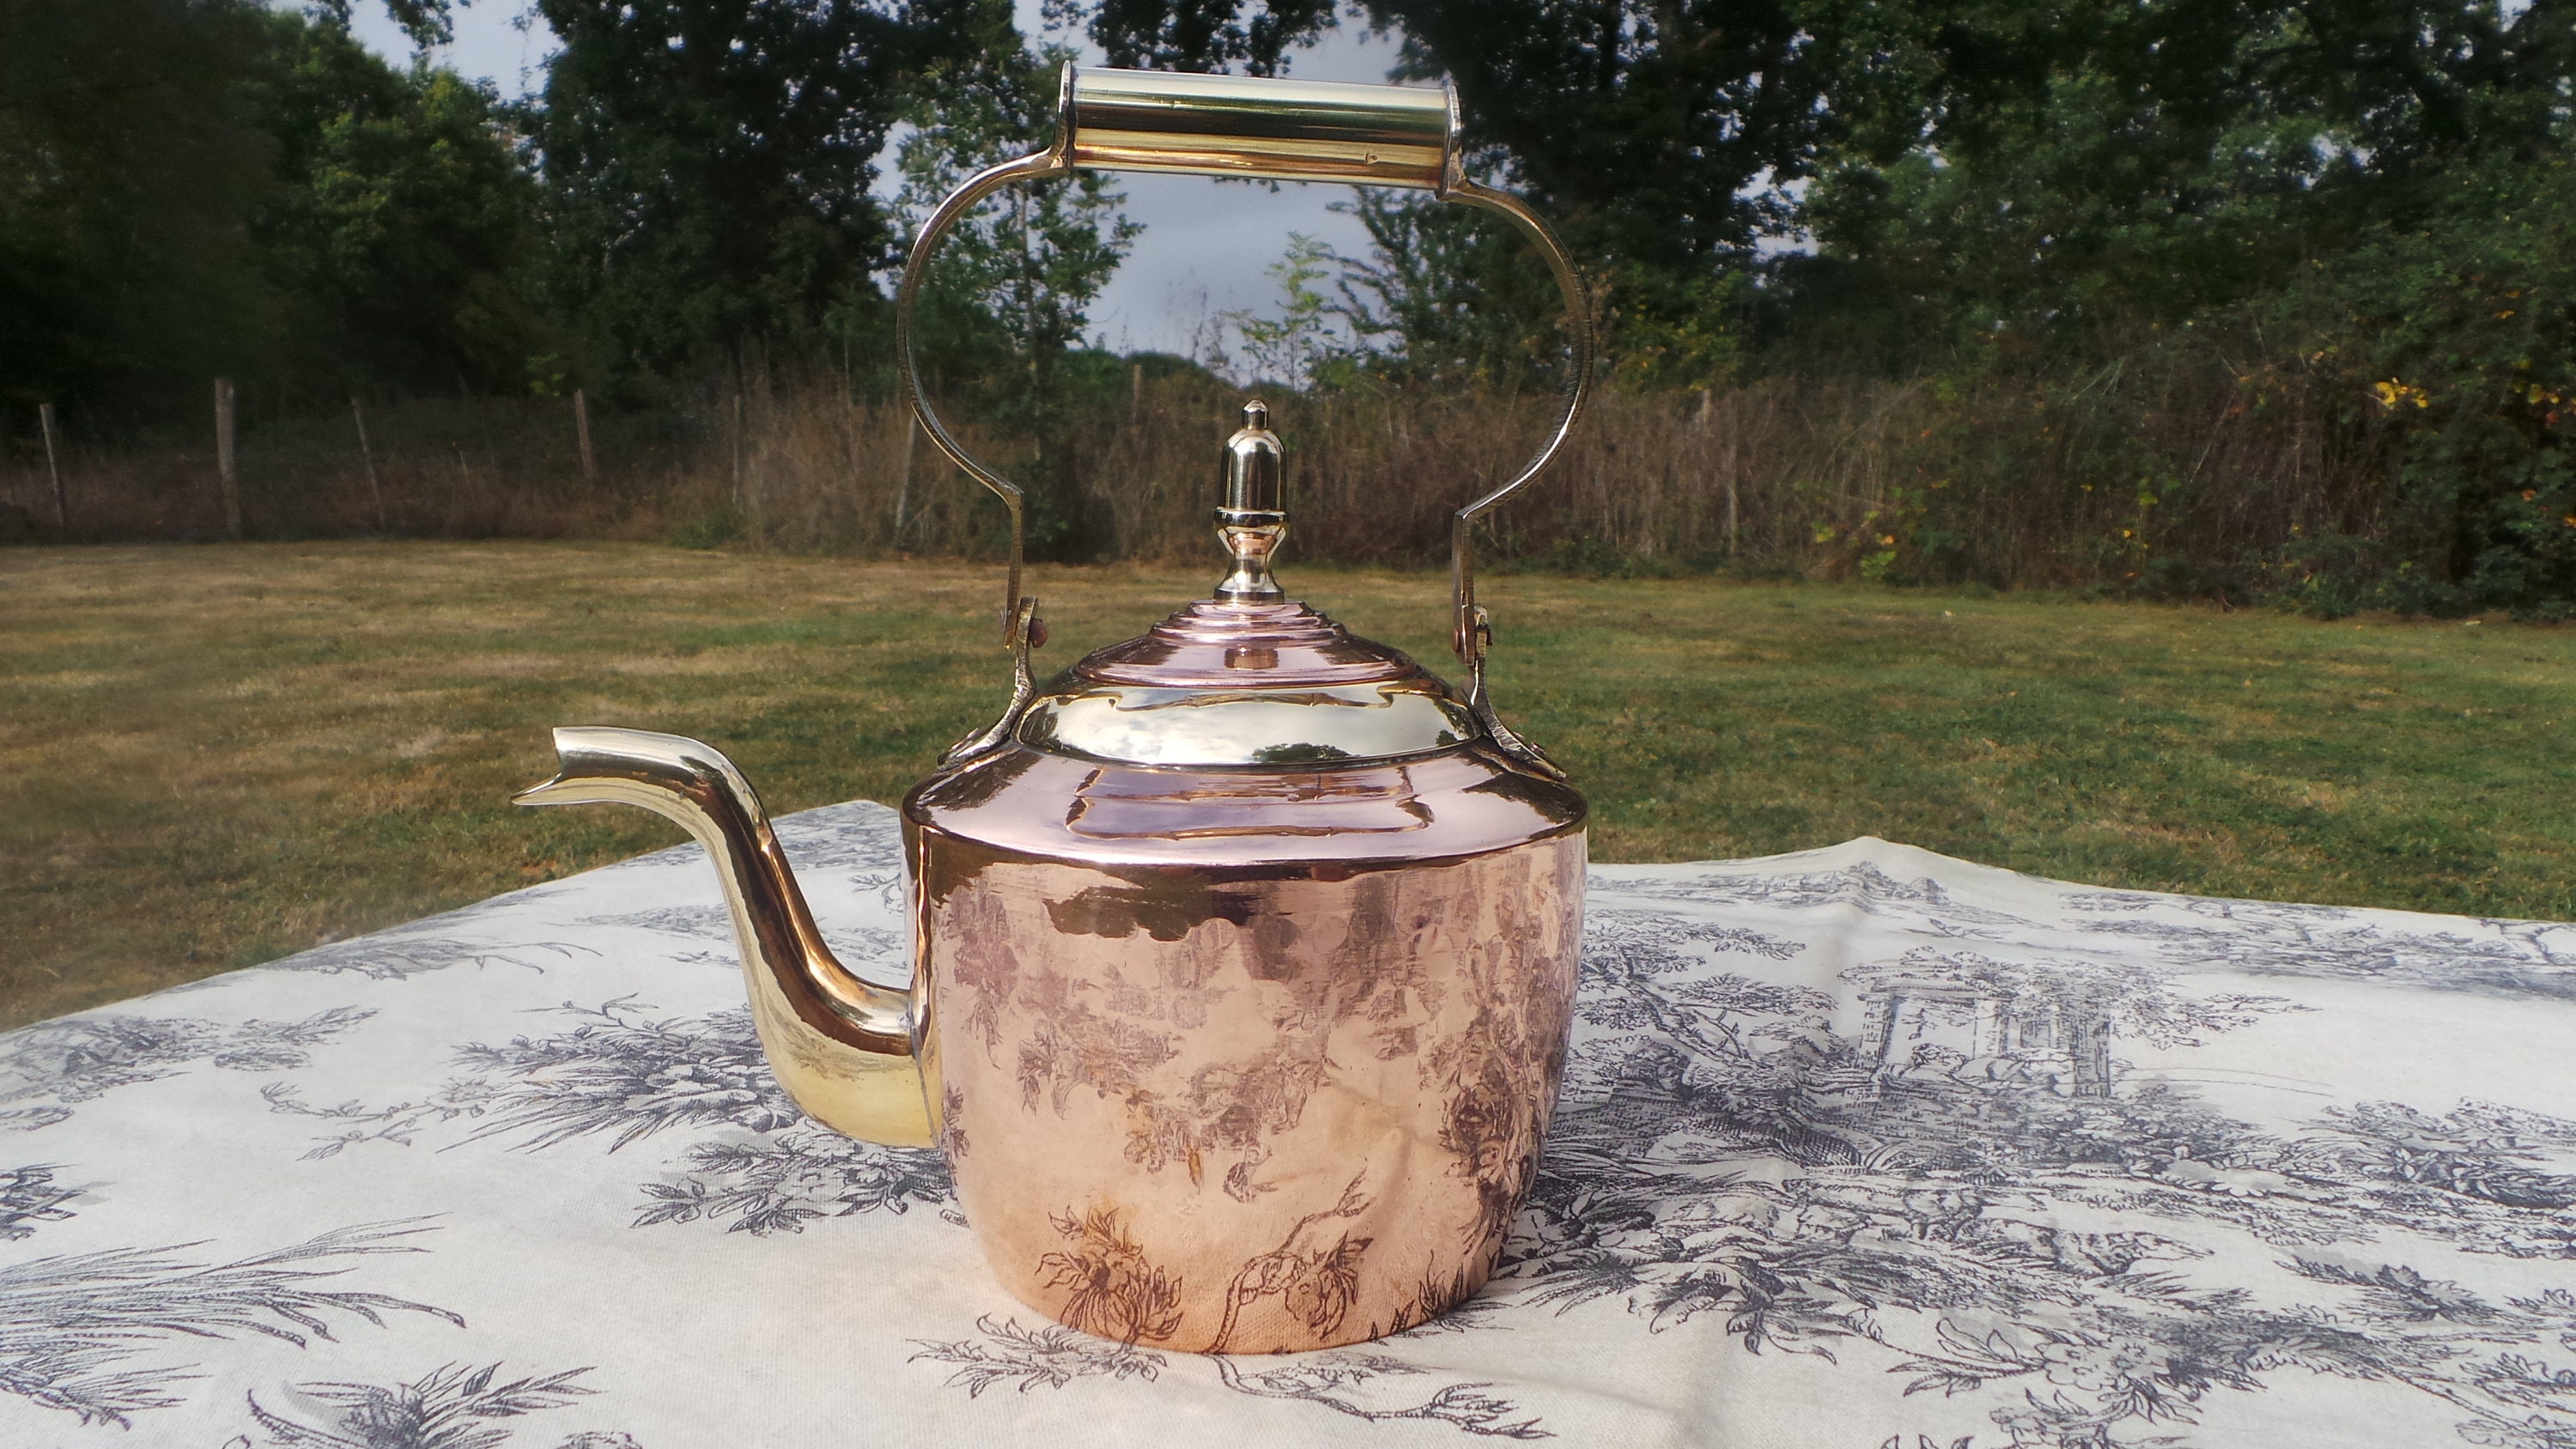 Antique Vintage Copper & Brass Fitting Electric Kettle